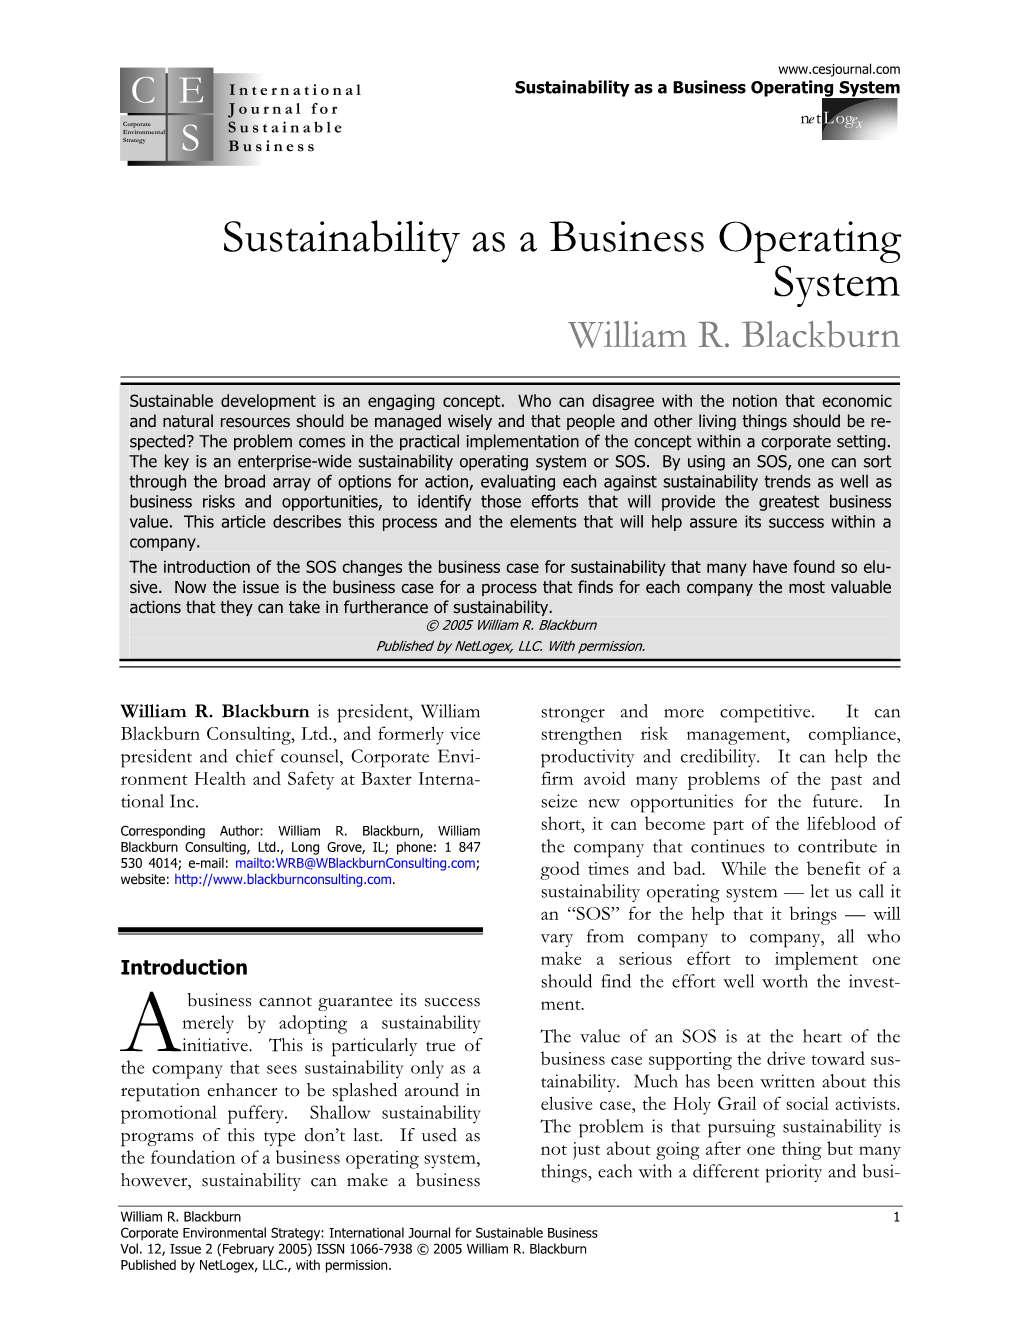 Sustainability As a Business Operating System